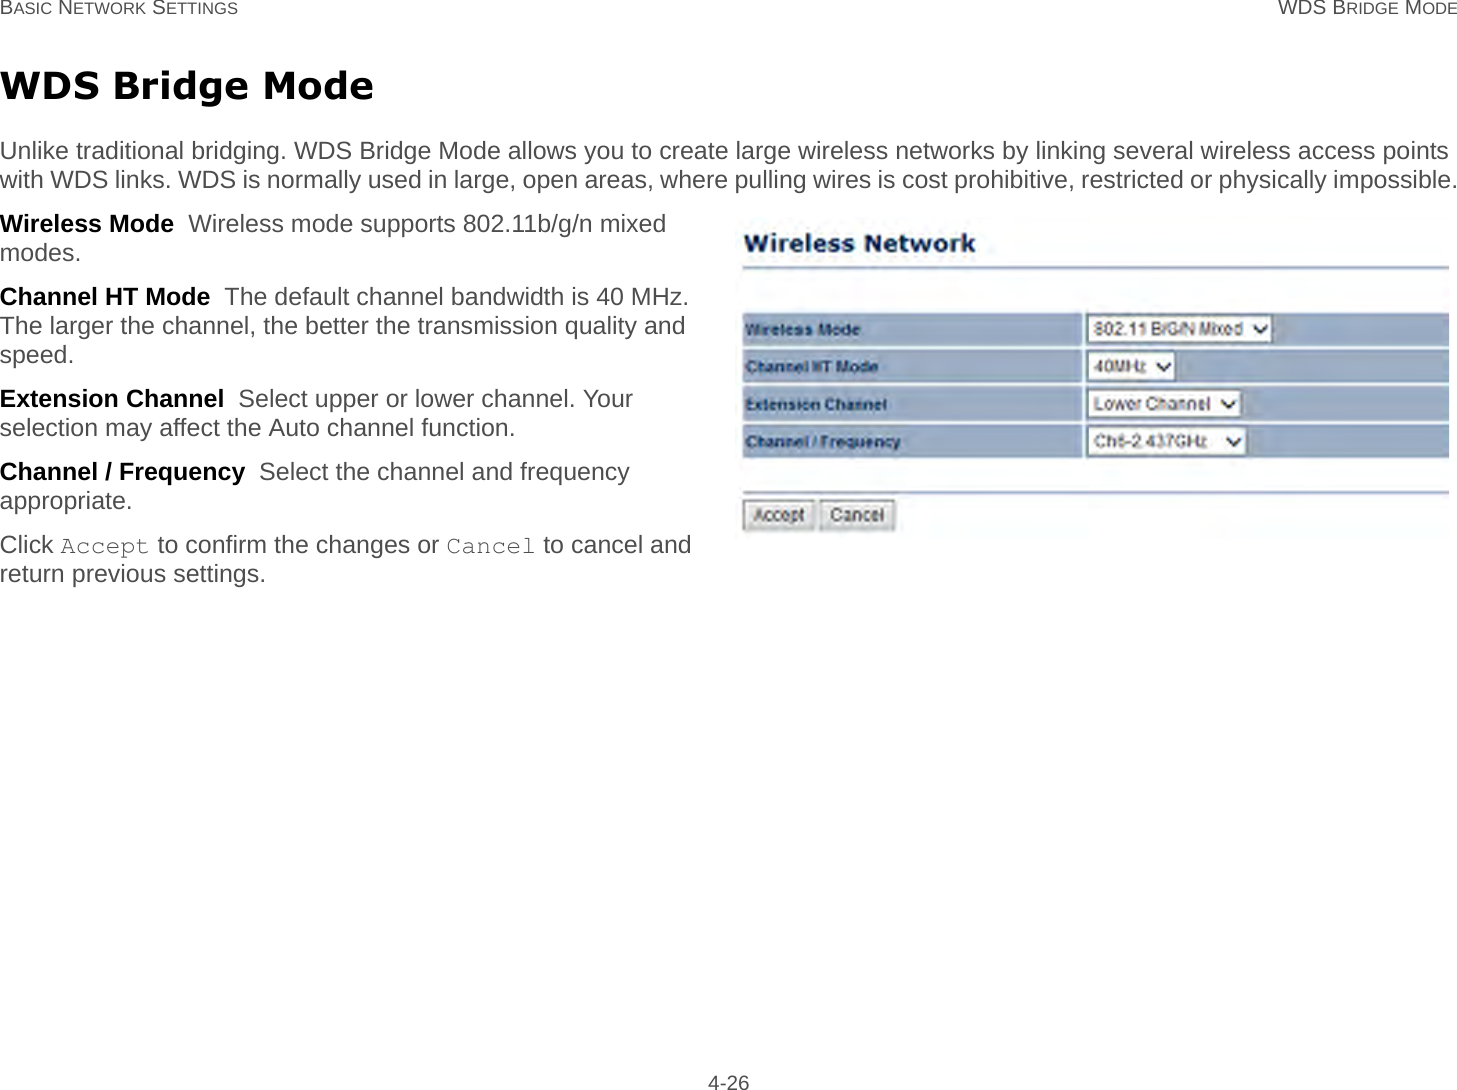 BASIC NETWORK SETTINGS WDS BRIDGE MODE 4-26WDS Bridge ModeUnlike traditional bridging. WDS Bridge Mode allows you to create large wireless networks by linking several wireless access points with WDS links. WDS is normally used in large, open areas, where pulling wires is cost prohibitive, restricted or physically impossible.Wireless Mode  Wireless mode supports 802.11b/g/n mixed modes.Channel HT Mode  The default channel bandwidth is 40 MHz. The larger the channel, the better the transmission quality and speed.Extension Channel  Select upper or lower channel. Your selection may affect the Auto channel function.Channel / Frequency  Select the channel and frequency appropriate.Click Accept to confirm the changes or Cancel to cancel and return previous settings.